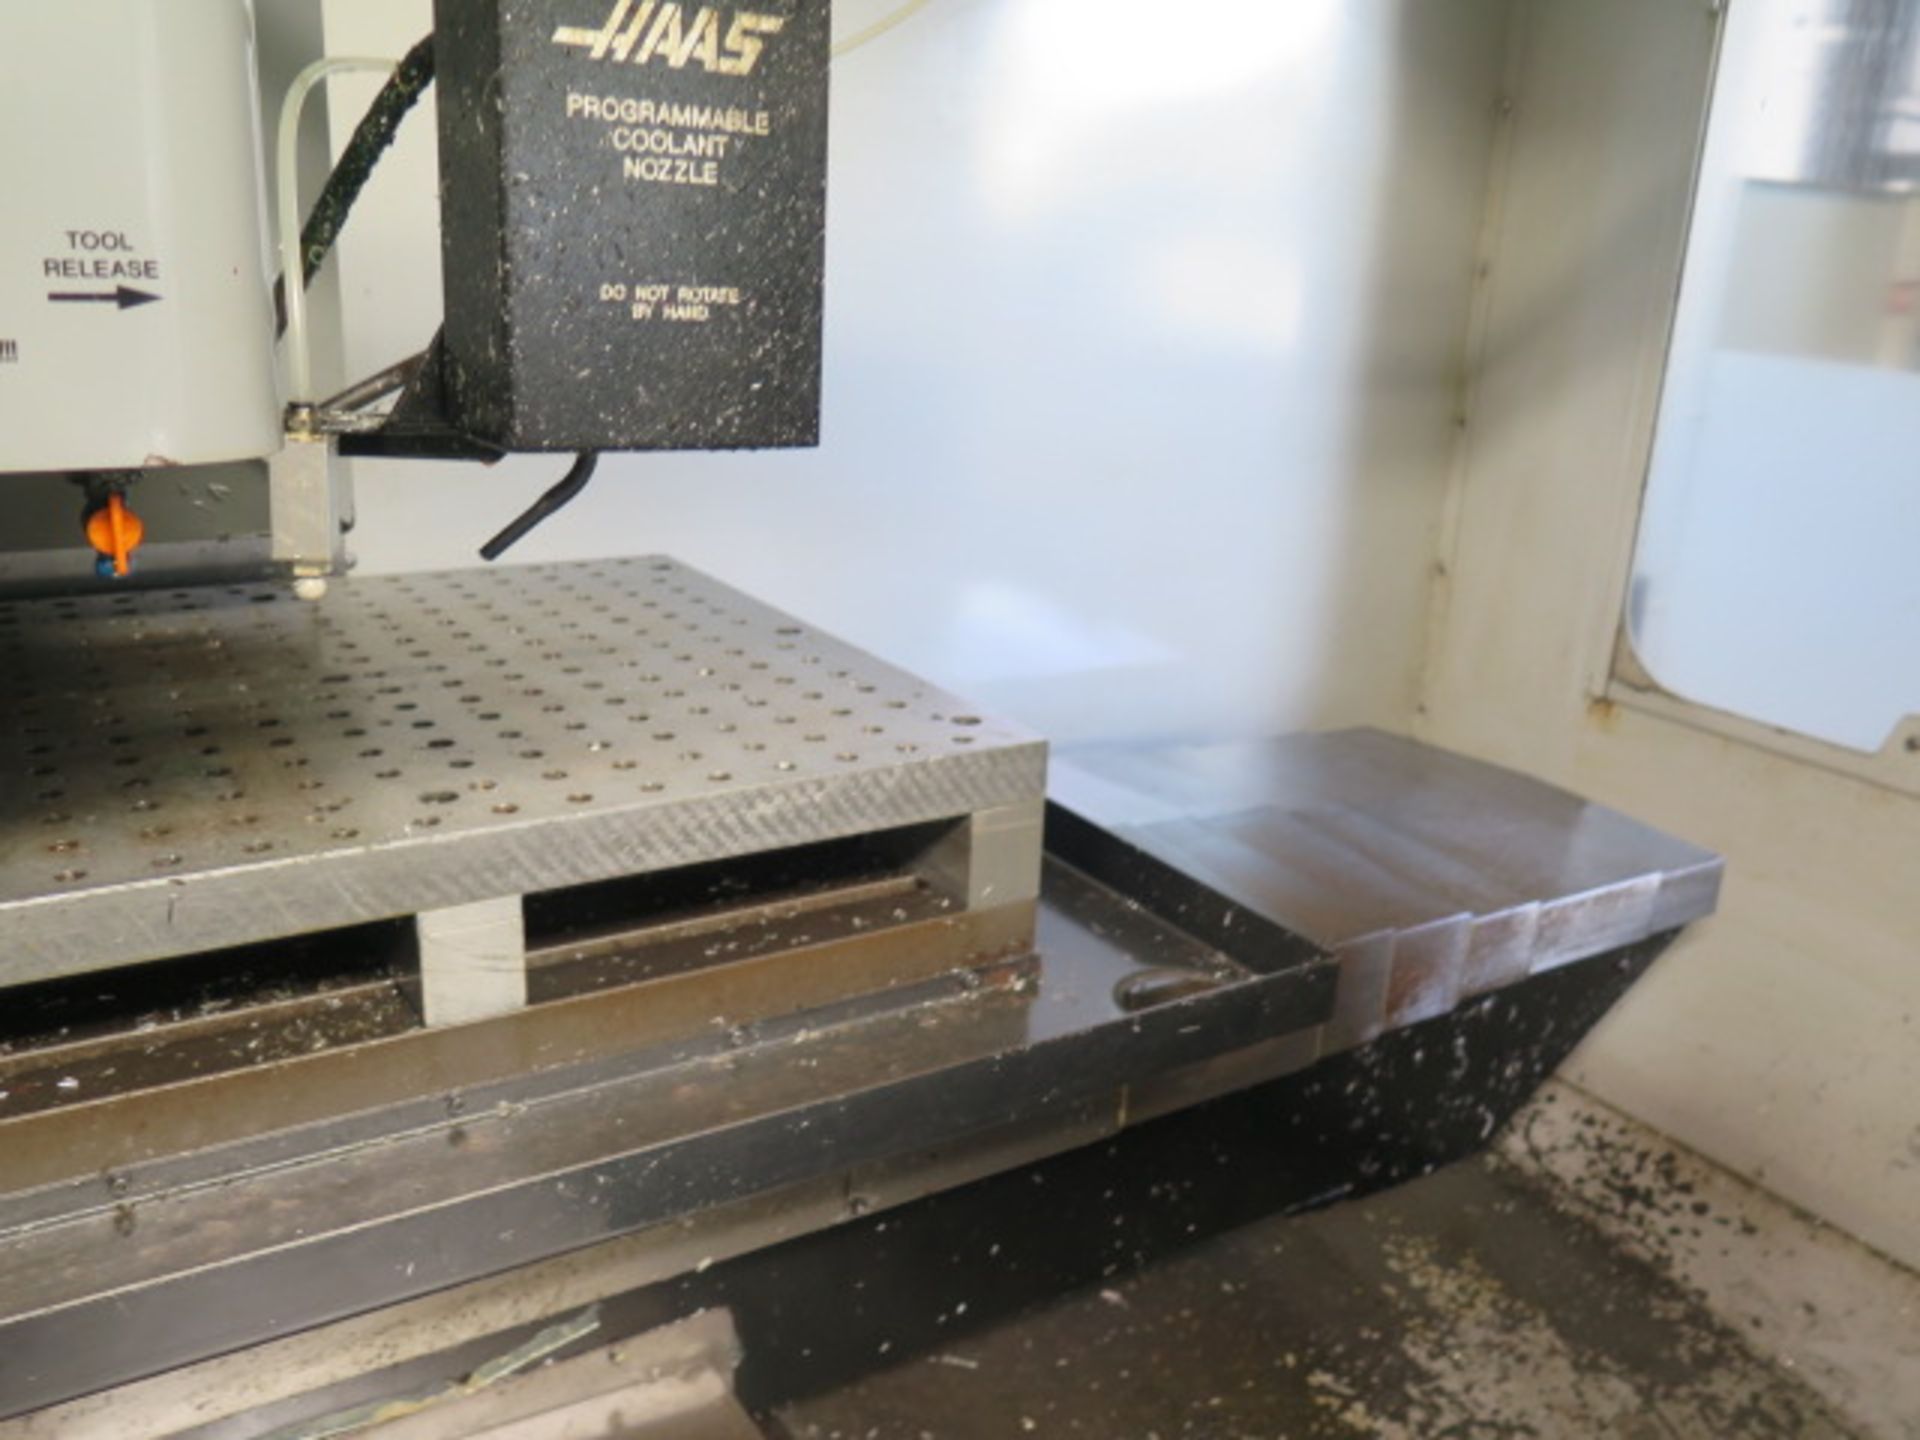 2000 Haas VF-5 4-Axis CNC Vertical Machining Center s/n 21677 w/ Haas Controls, SOLD AS IS - Image 14 of 20